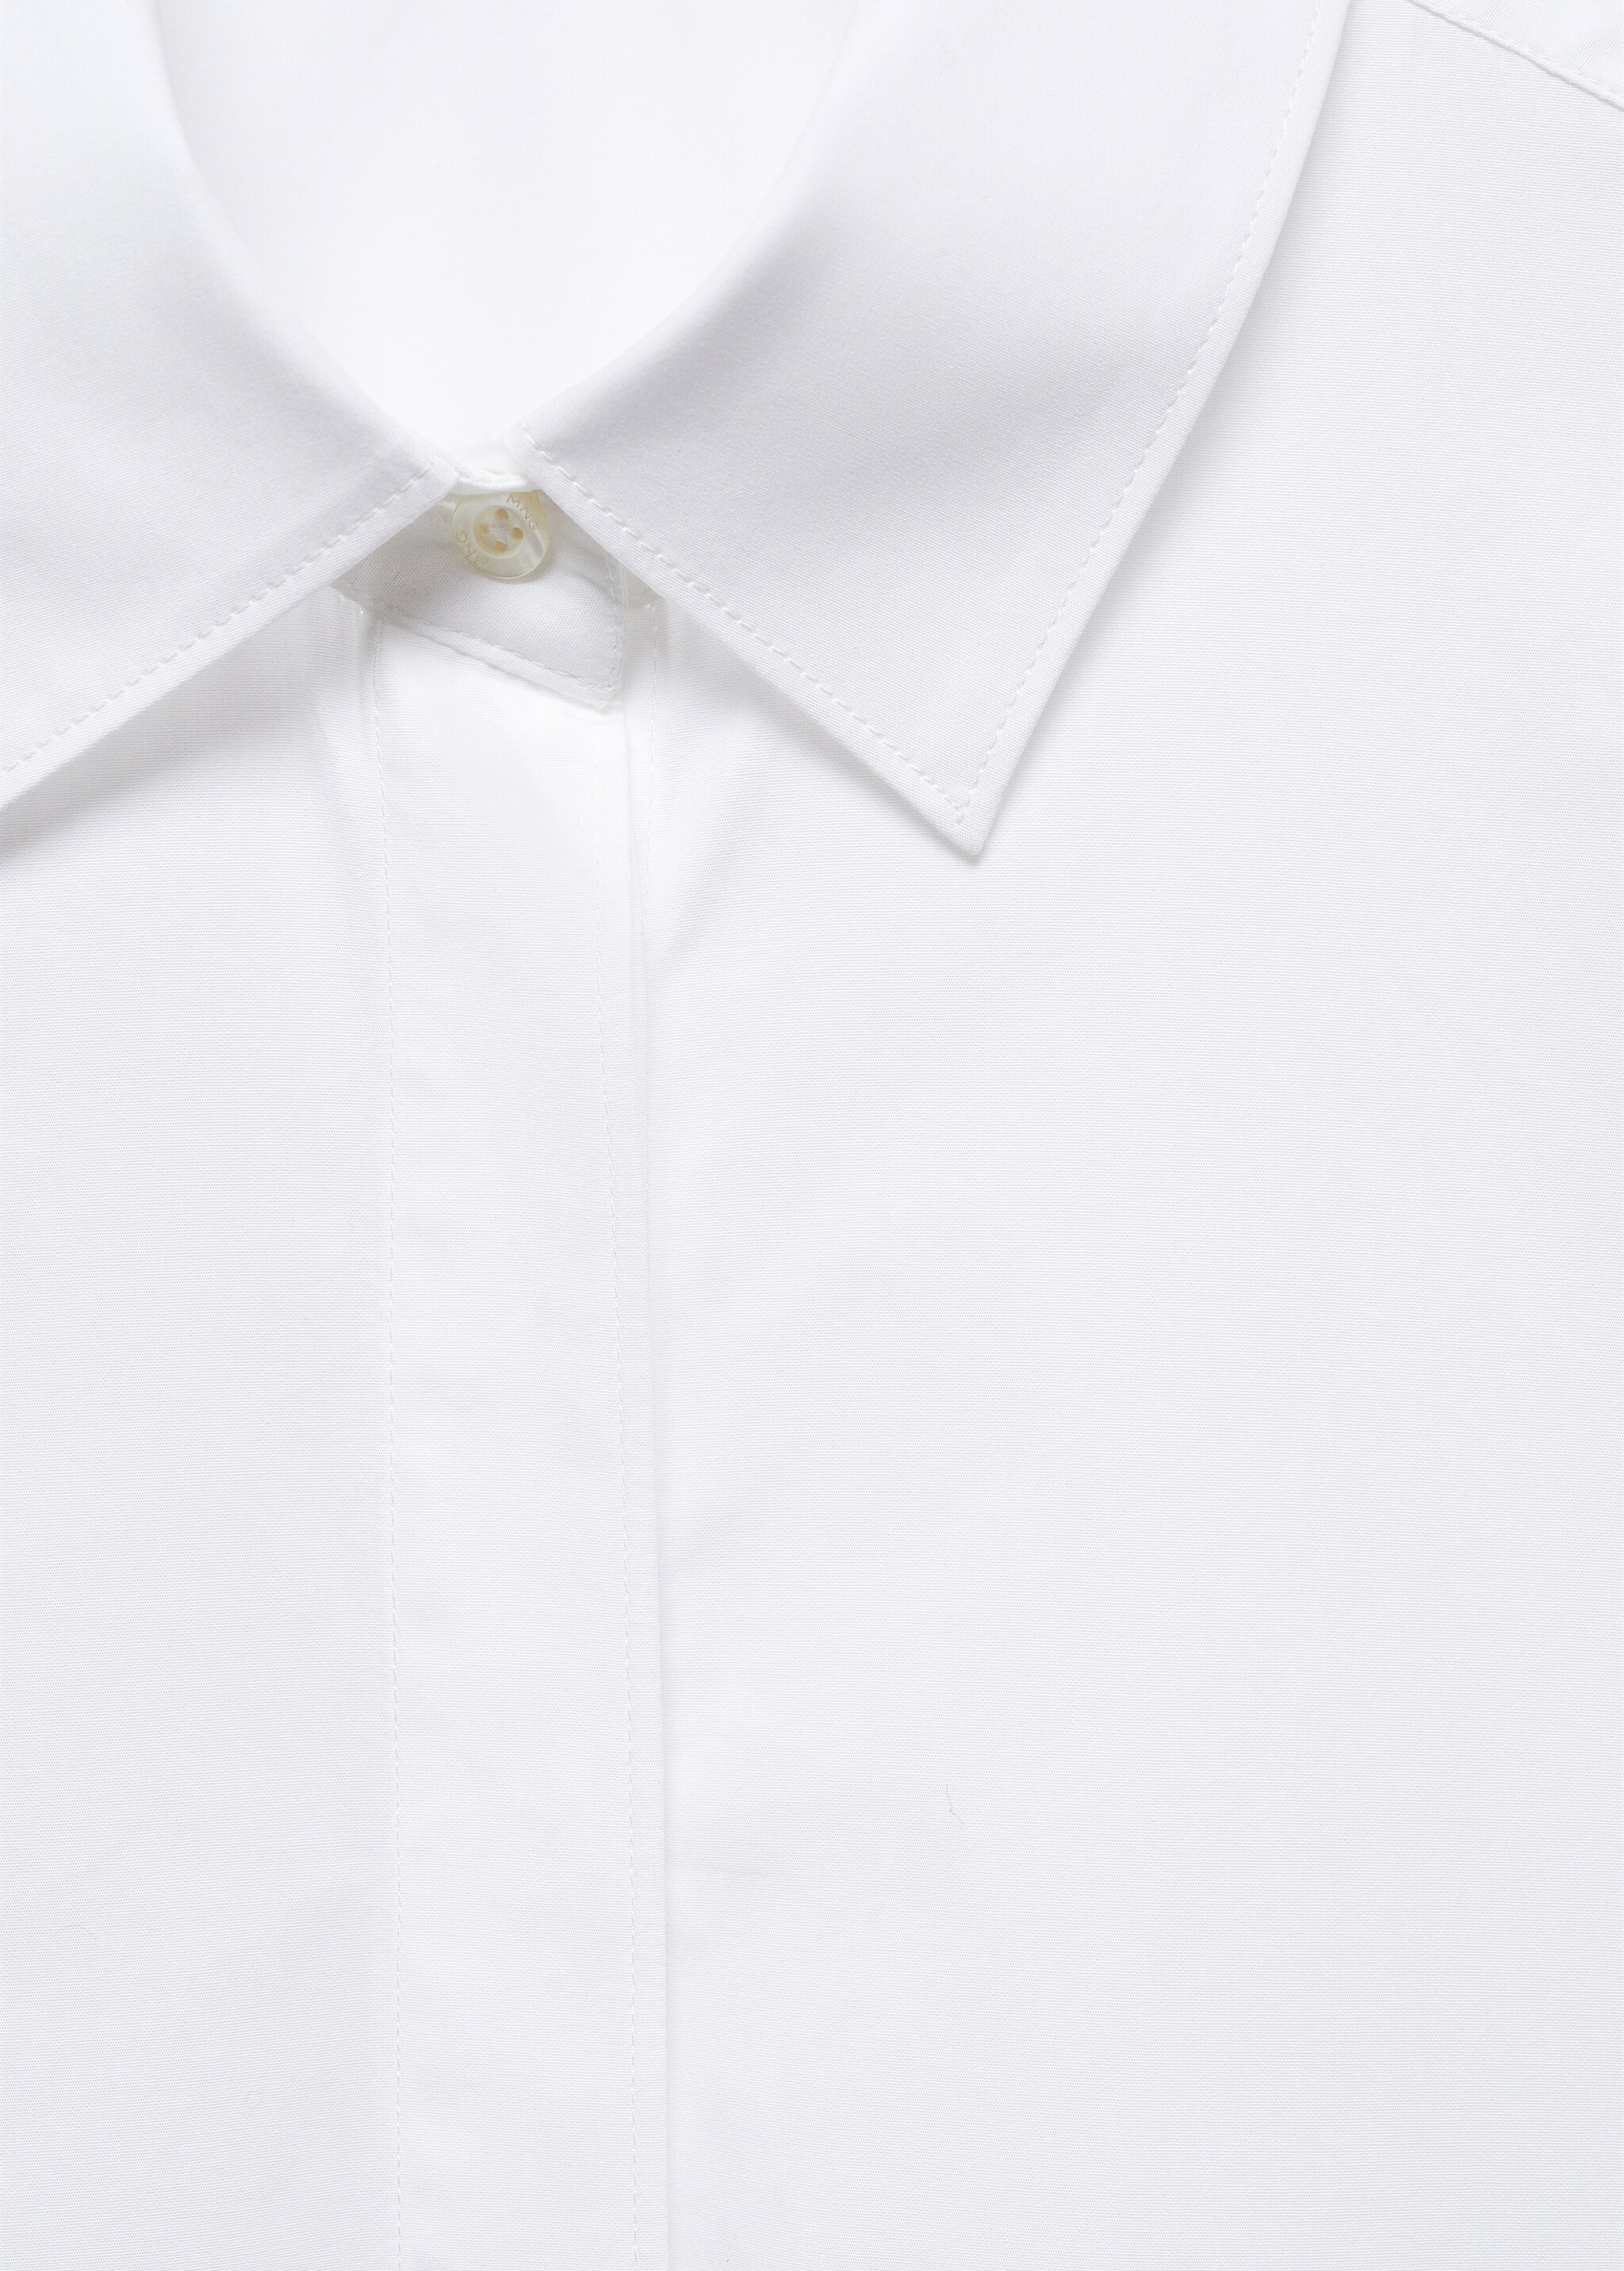 Cotton shirt with hidden buttons  - Details of the article 8